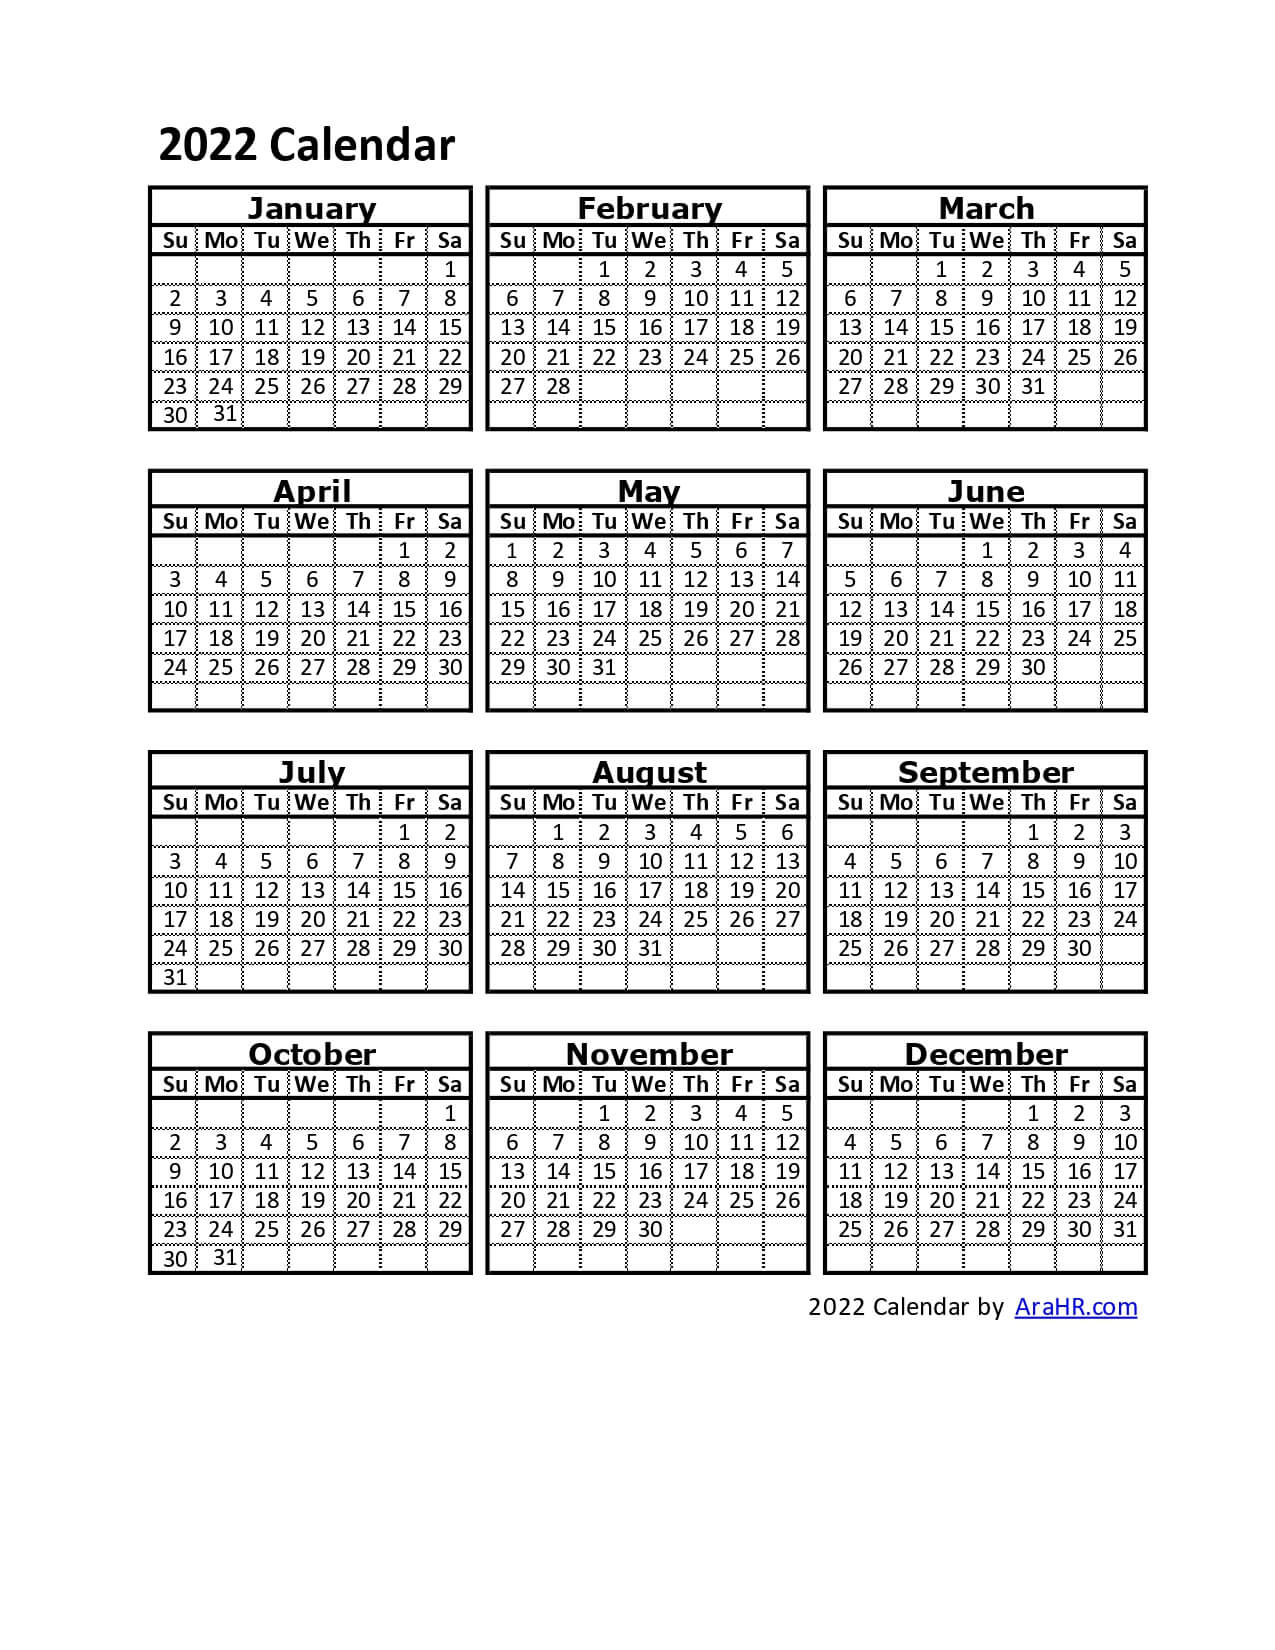 2022 Calendar Yearly Monthly Free Printable Template Excel Pdf Image Arahr